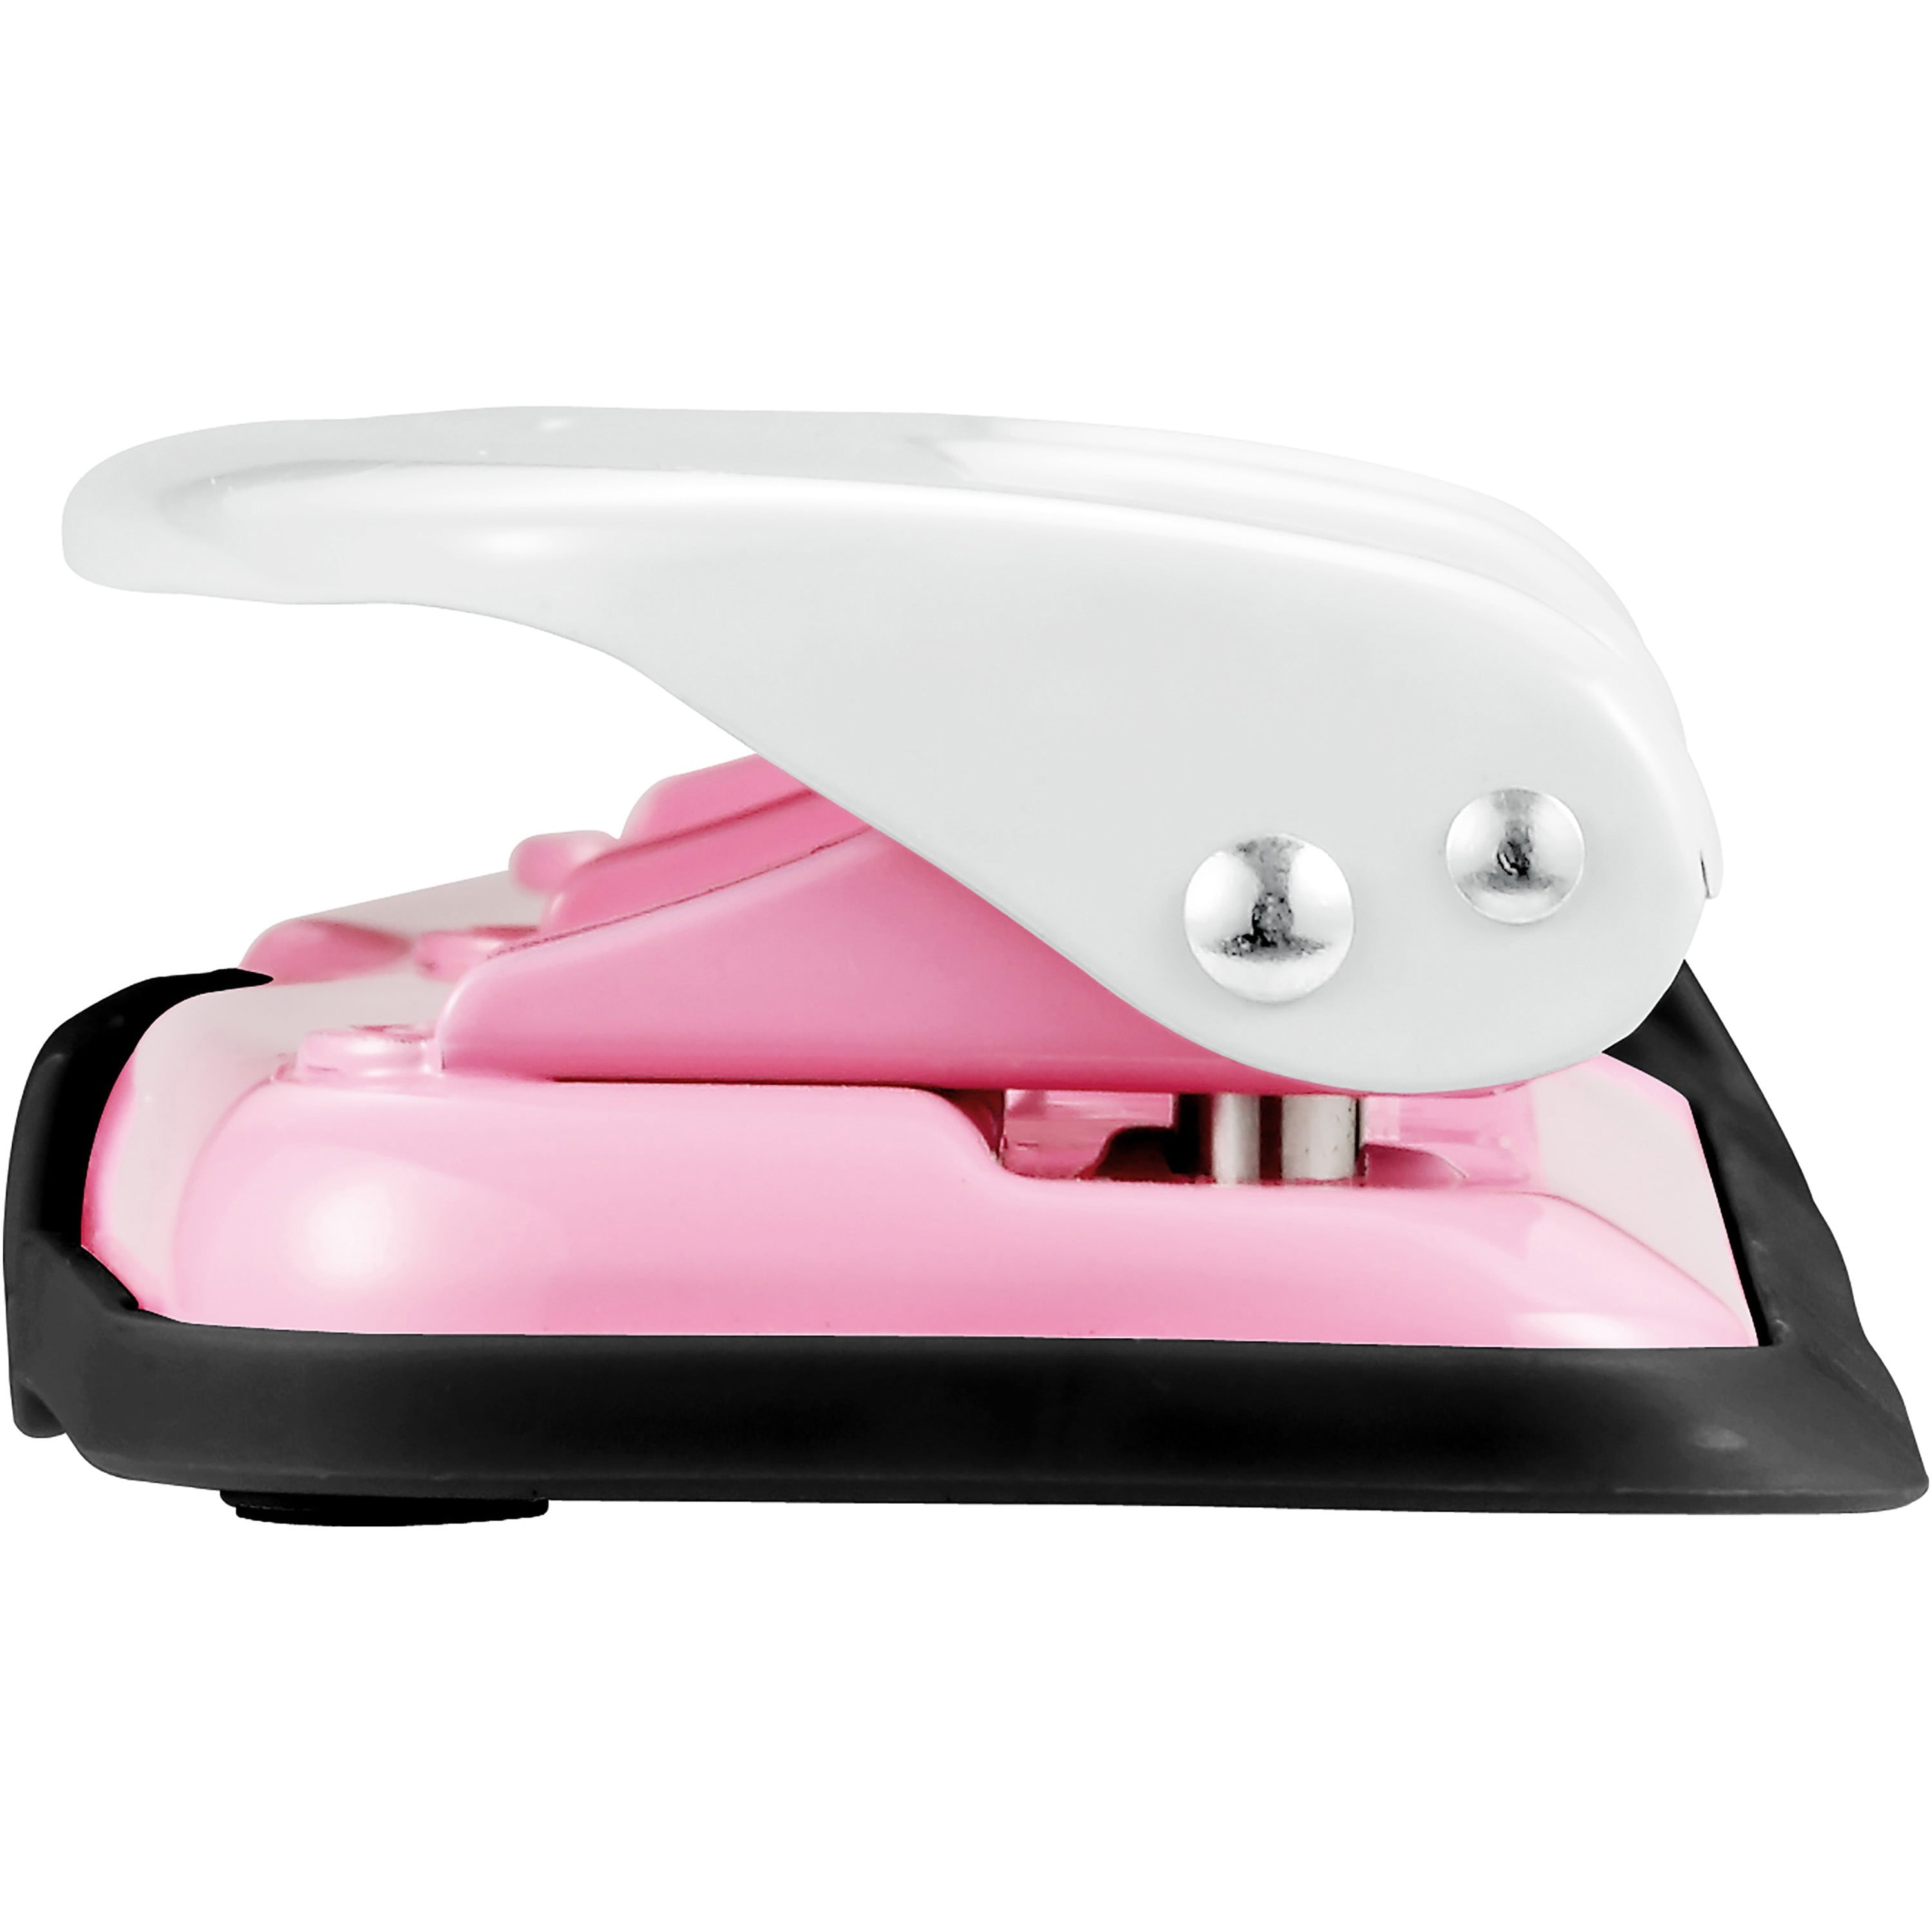  EXCEART Manual Punch 3 Hole Punch Heavy Duty Crafting